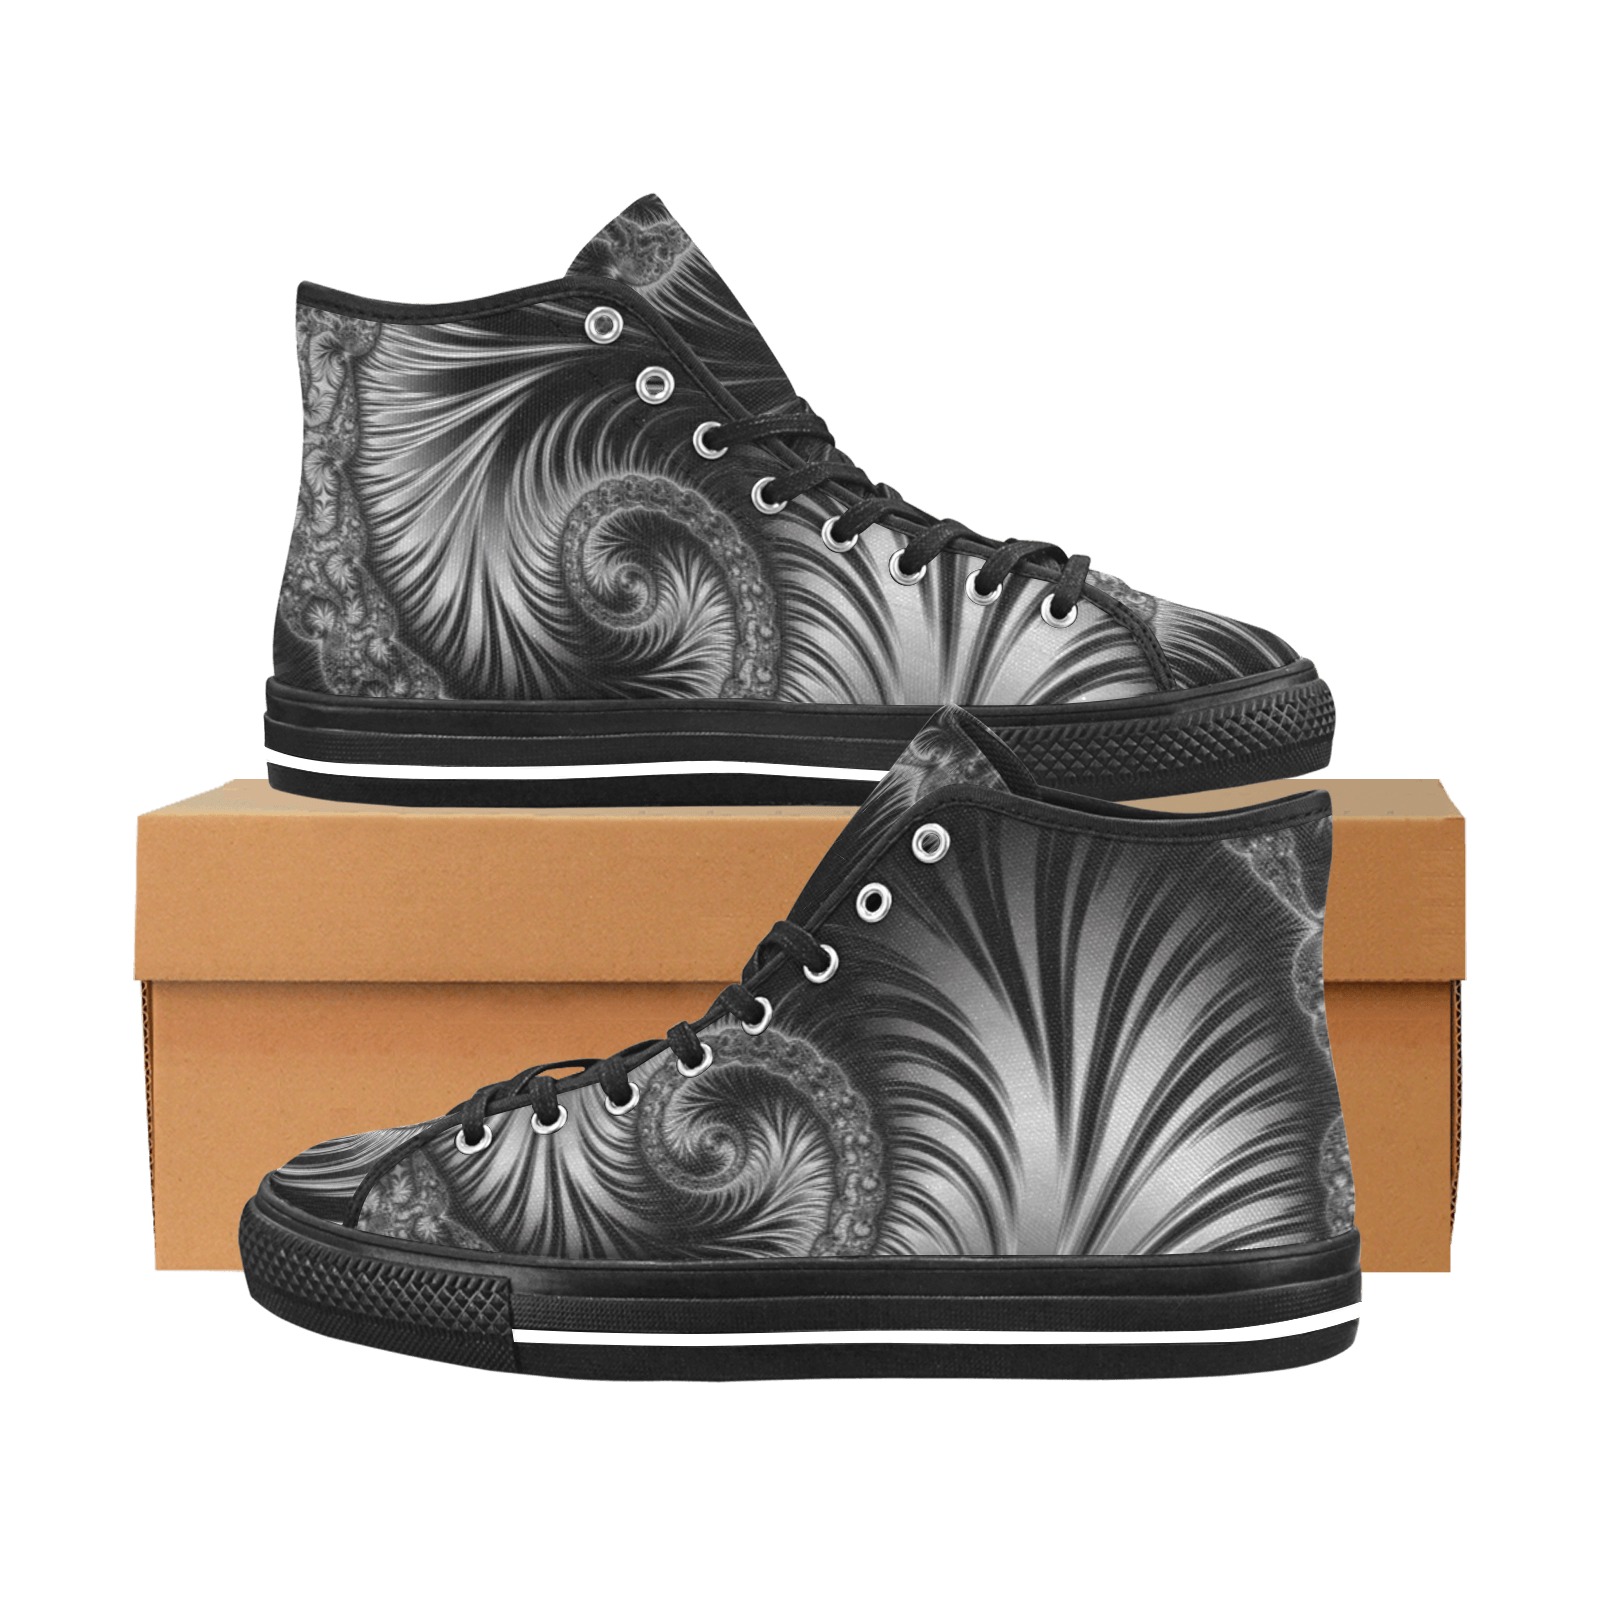 Black and Silver Spiral Fractal Abstract Vancouver H Men's Canvas Shoes (1013-1)